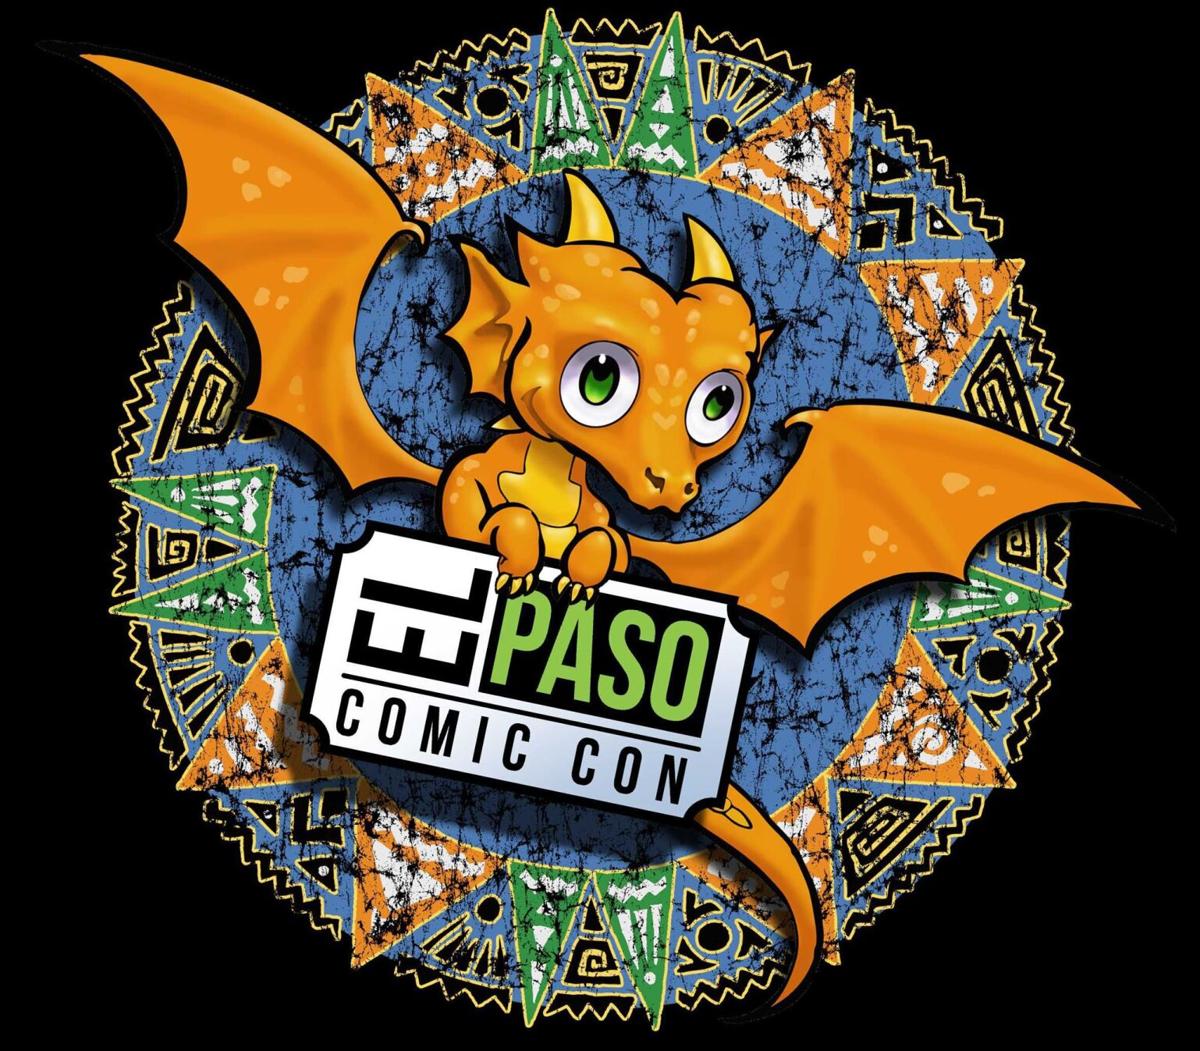 6 things to catch at El Paso Comic Con Lifestyle